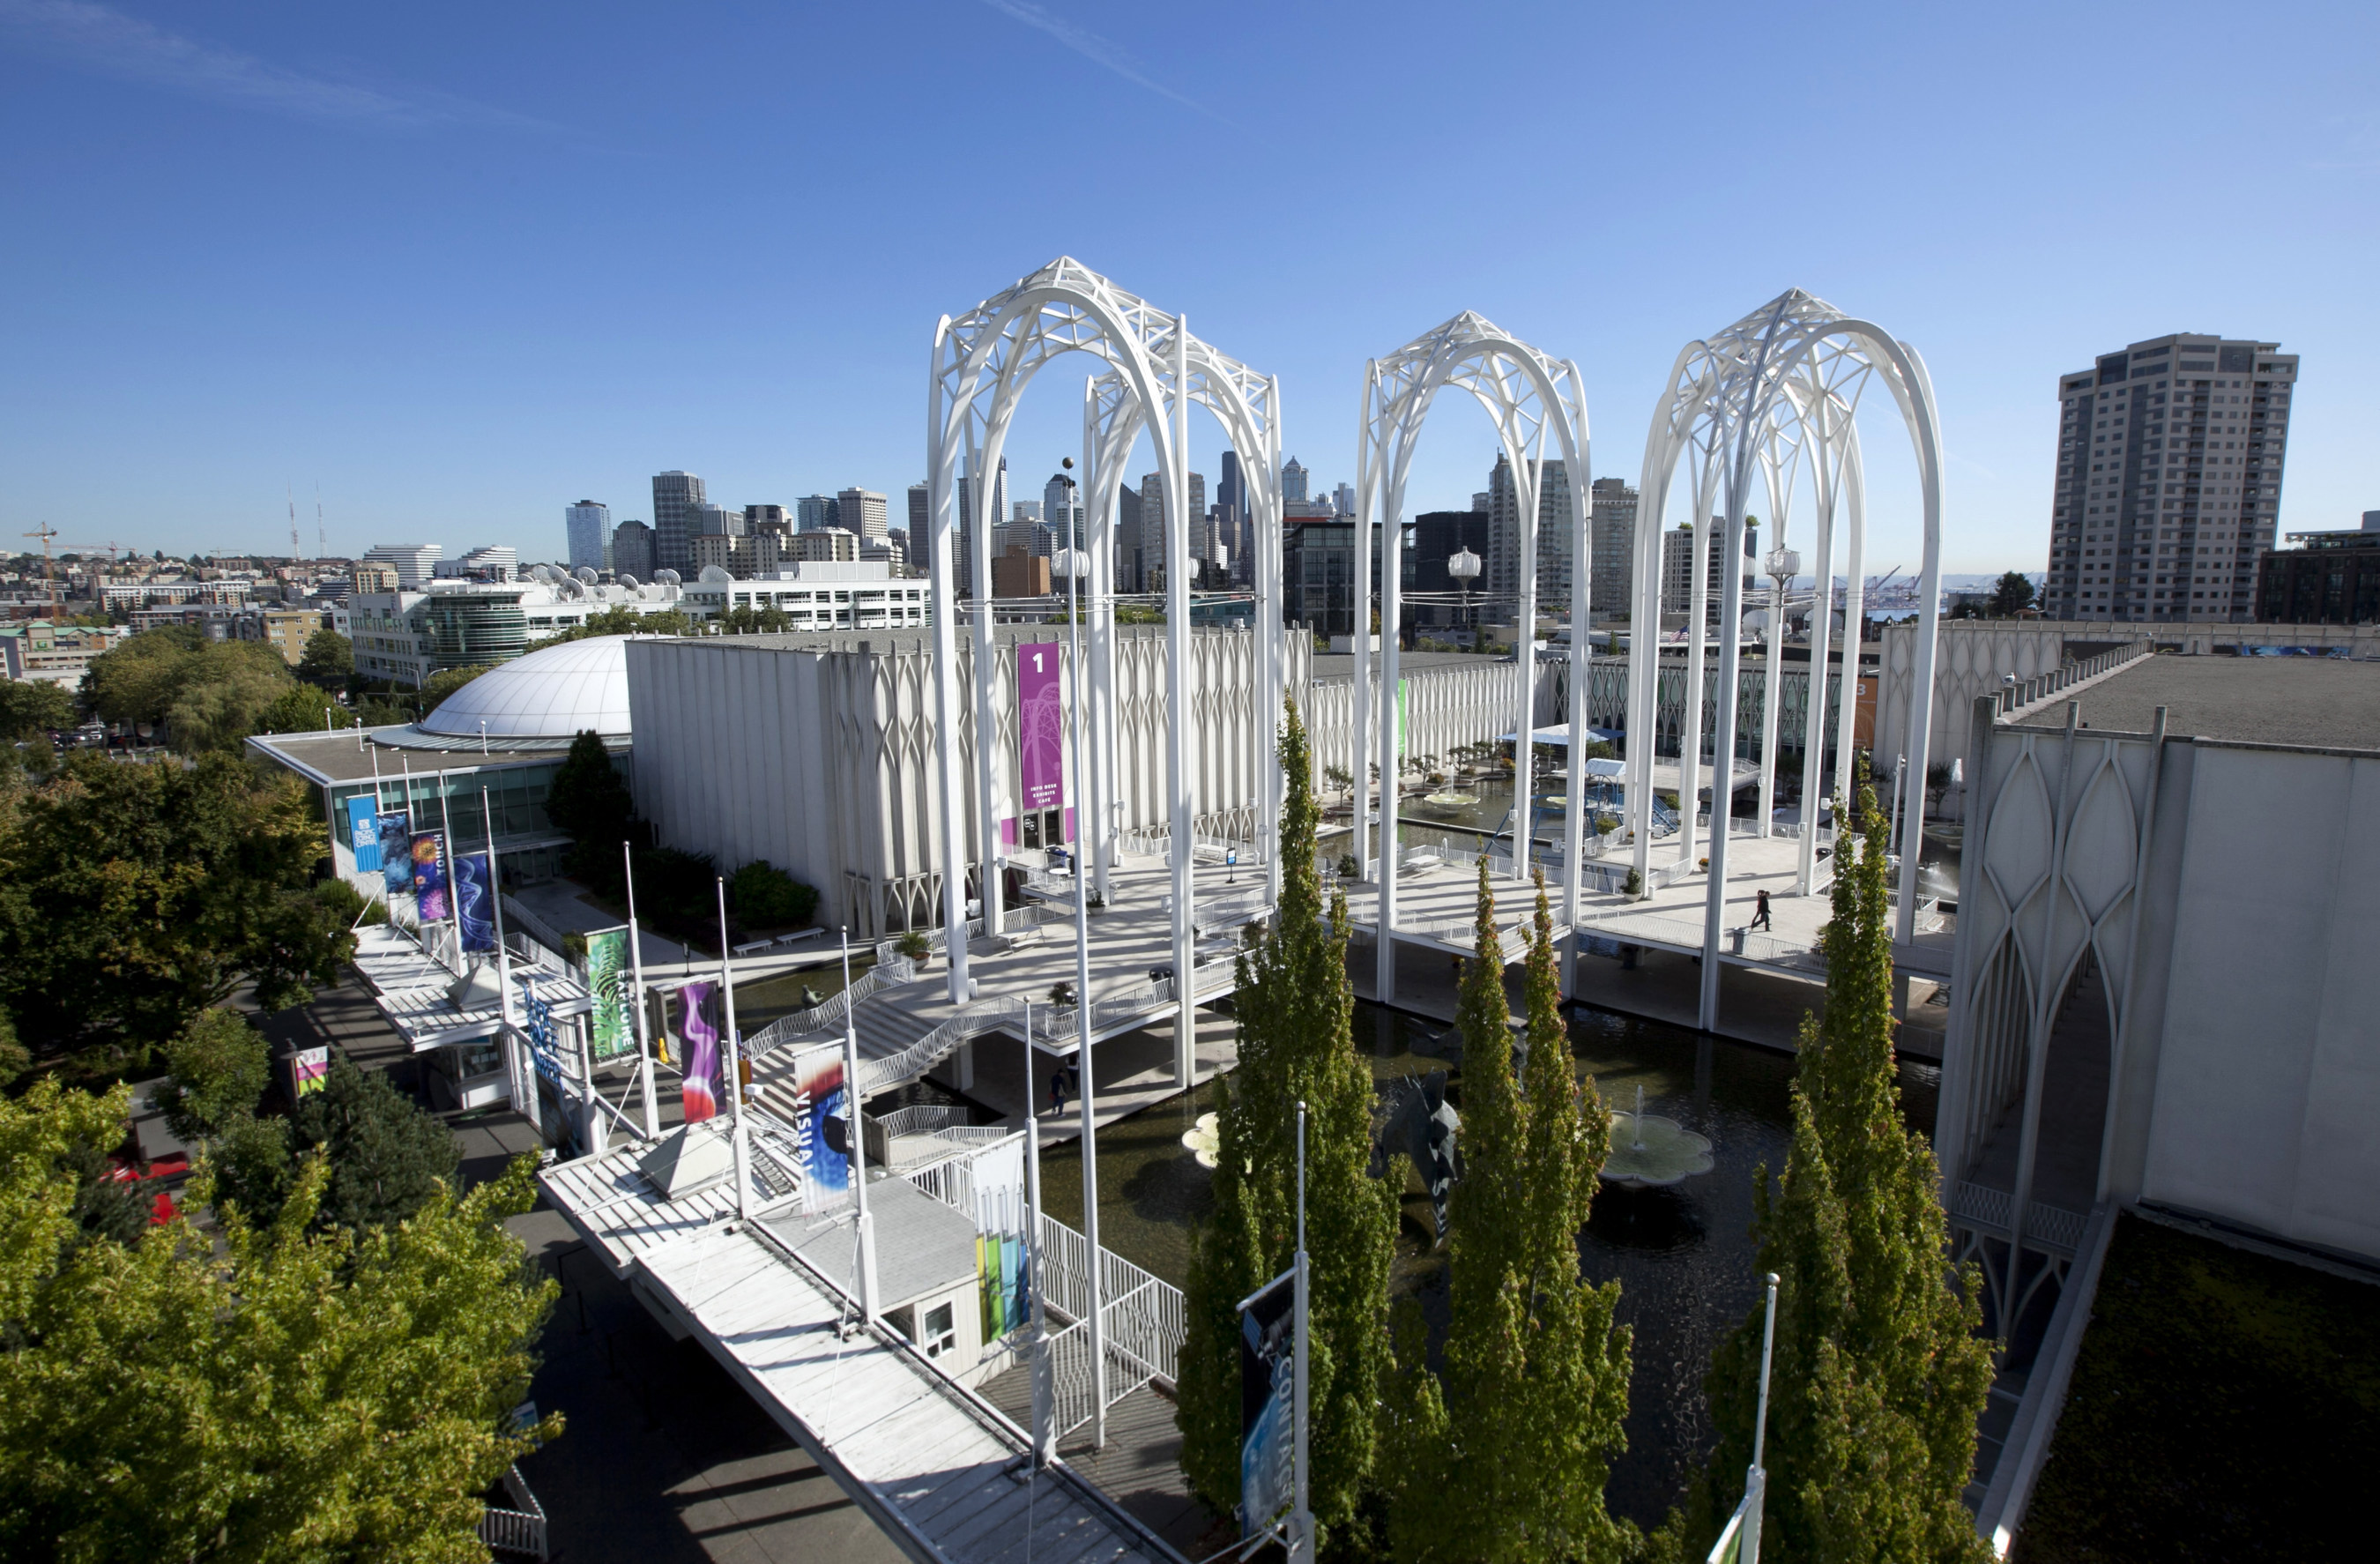 Pacific Science Center participates in Seattle Museum Month, February 1-28, 2015